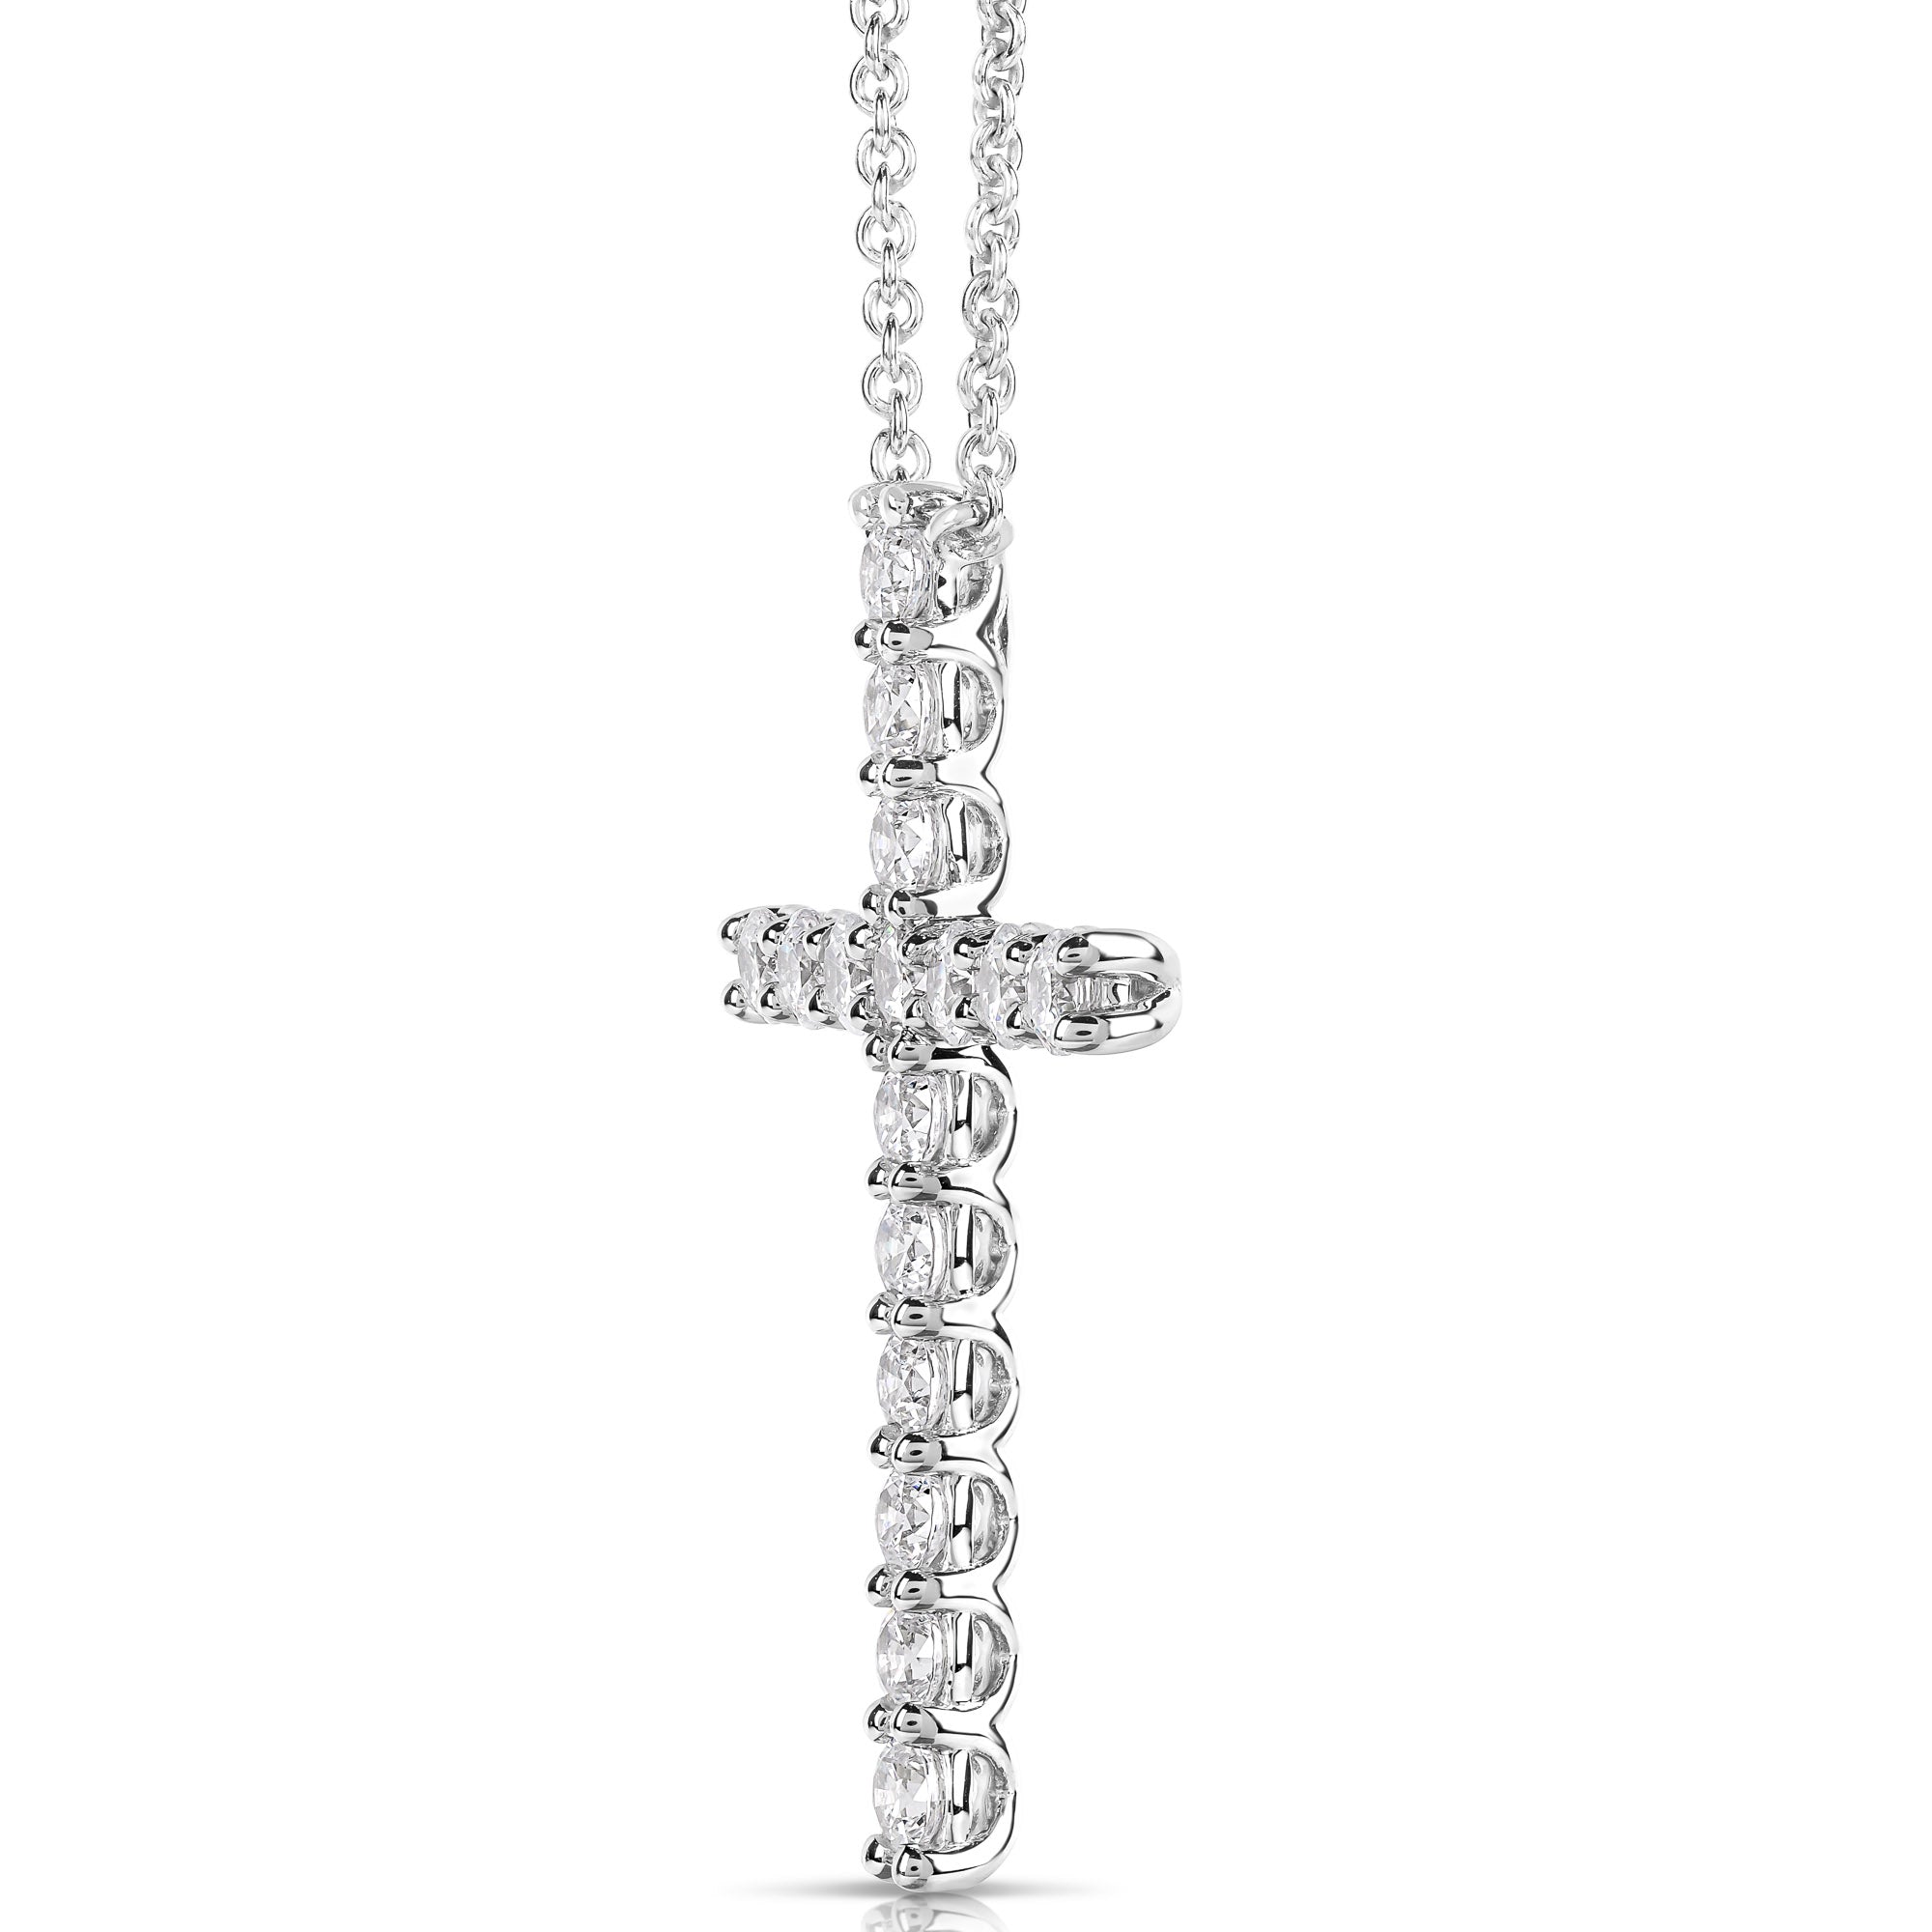 14K 1.00 Ct Colorless Flawless Cross Pendant With Chain